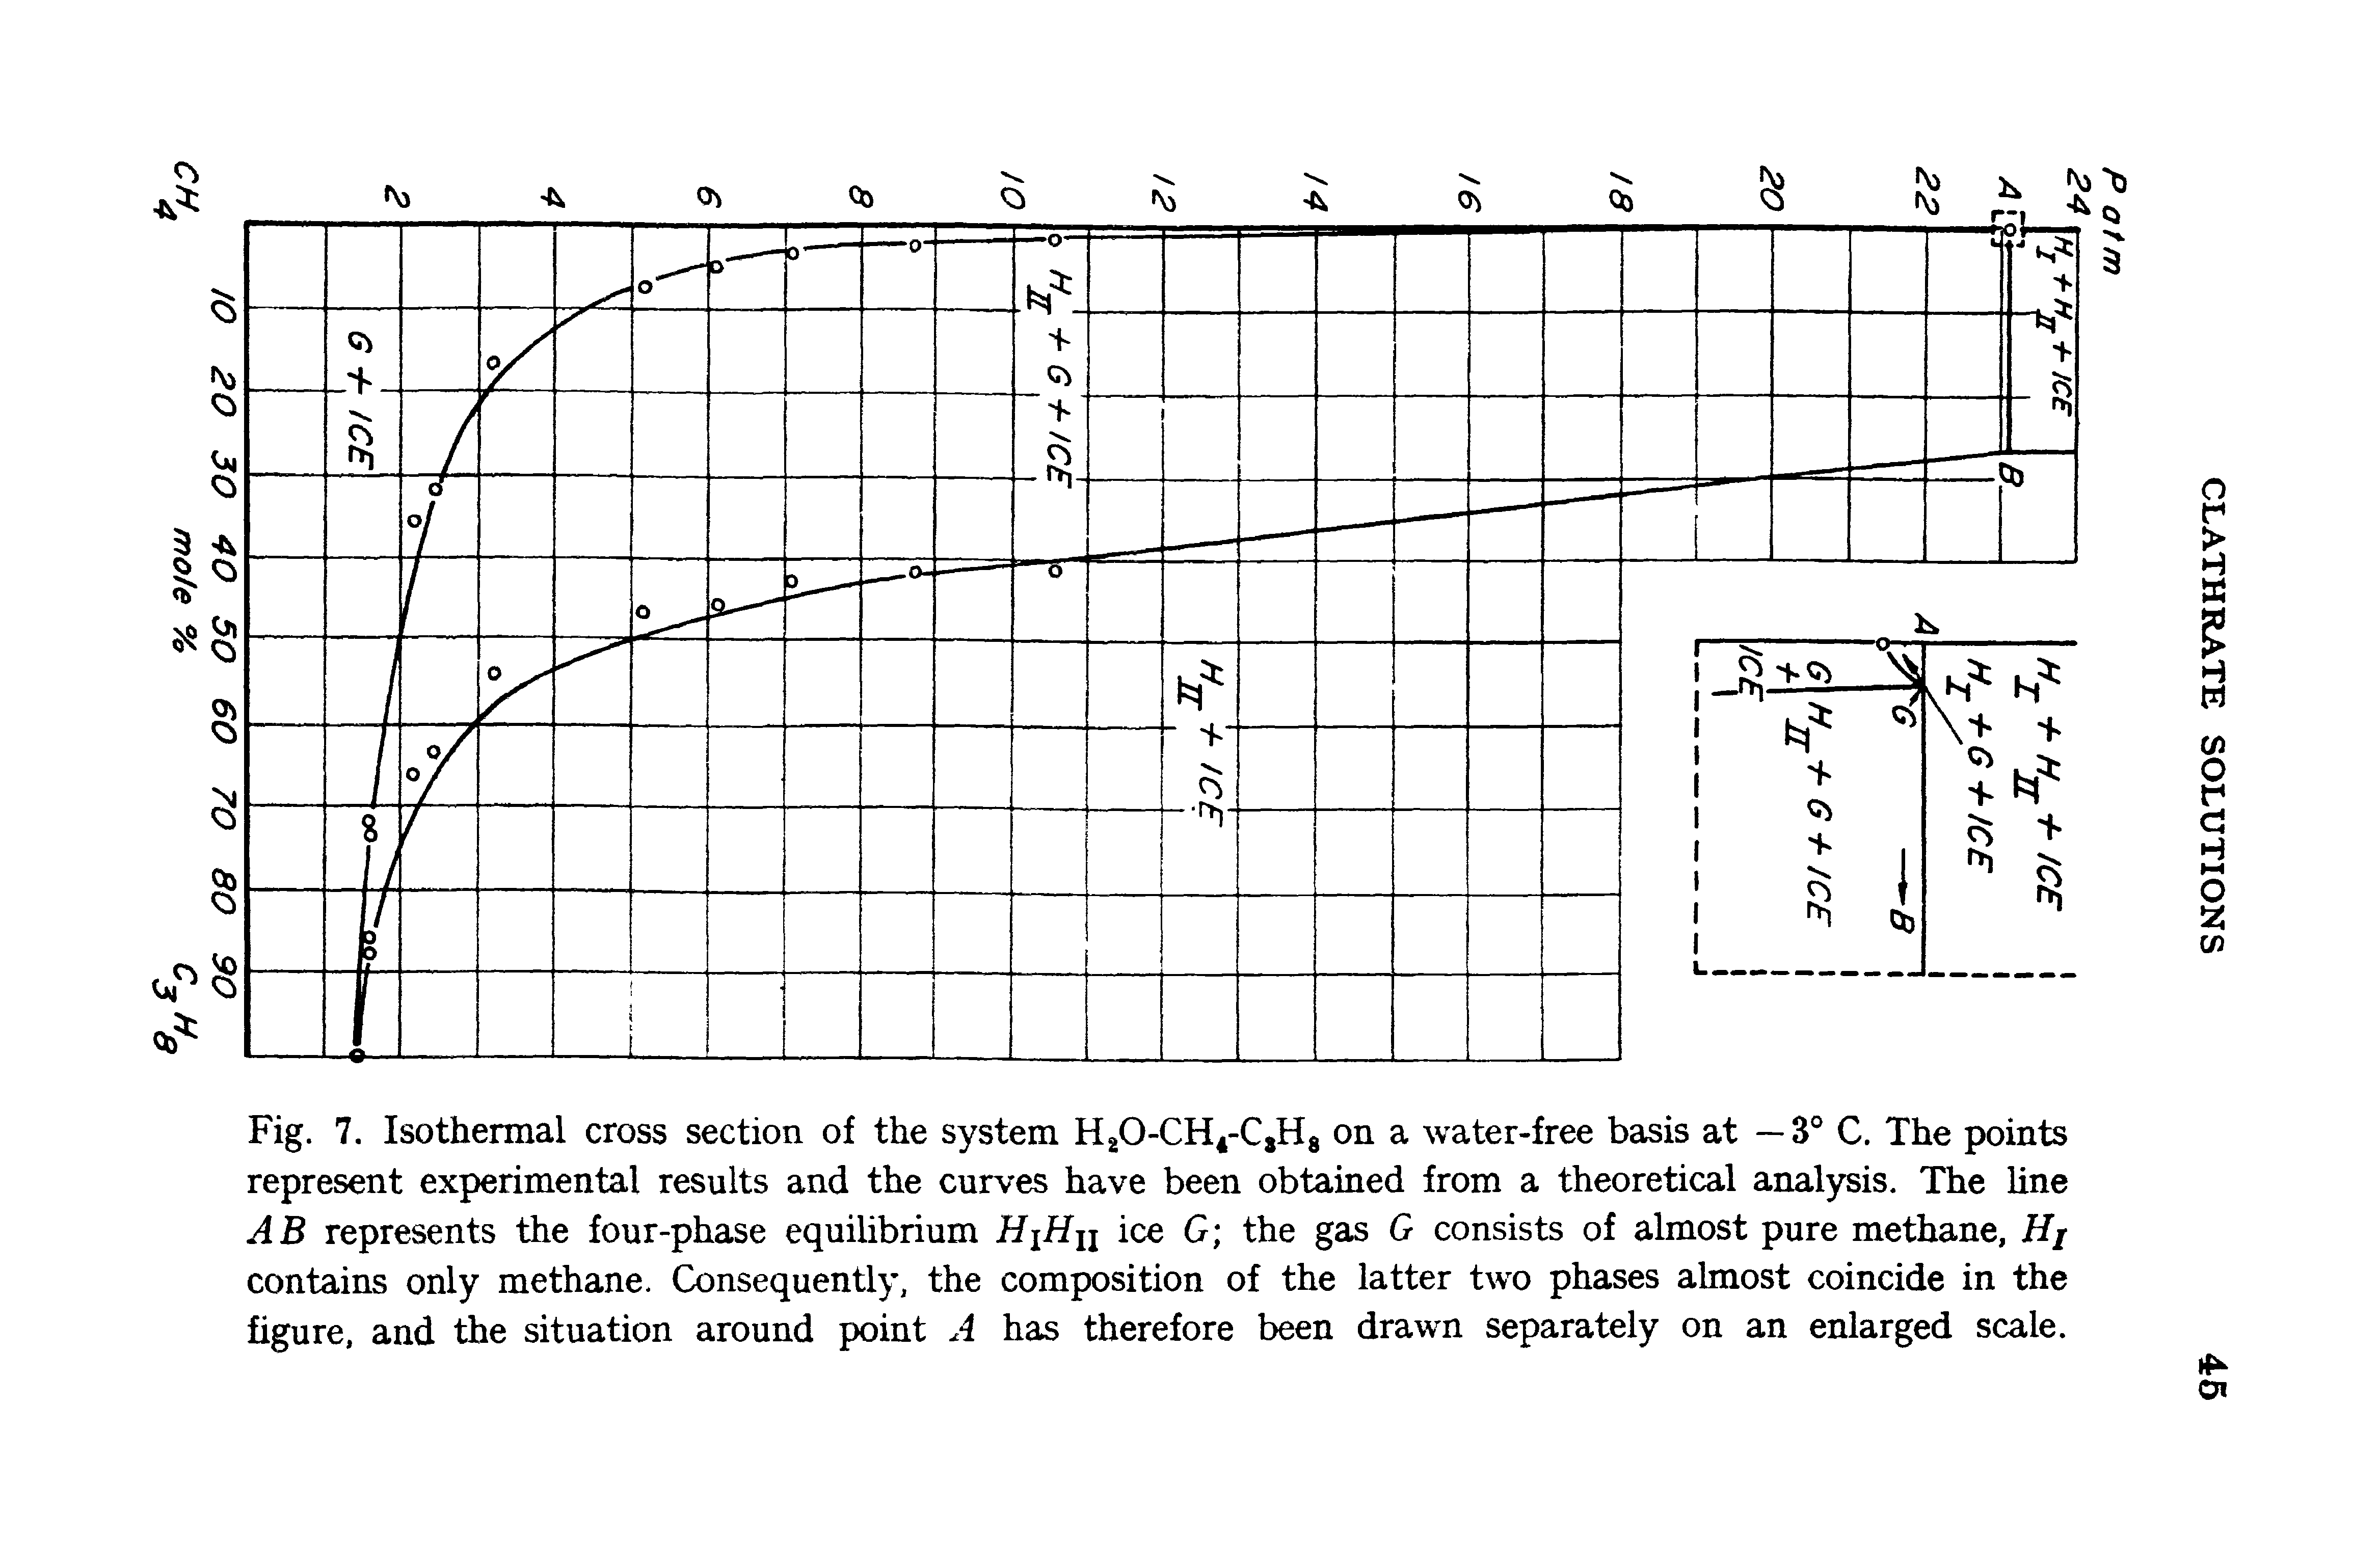 Fig. 7. Isothermal cross section of the system H20-CH4-CsH8 on a water-free basis at —3° C. The points represent experimental results and the curves have been obtained from a theoretical analysis. The line AB represents the four-phase equilibrium HiHn ice G the gas G consists of almost pure methane, Hj contains only methane. Consequently, the composition of the latter two phases almost coincide in the figure, and the situation around point A has therefore been drawn separately on an enlarged scale.